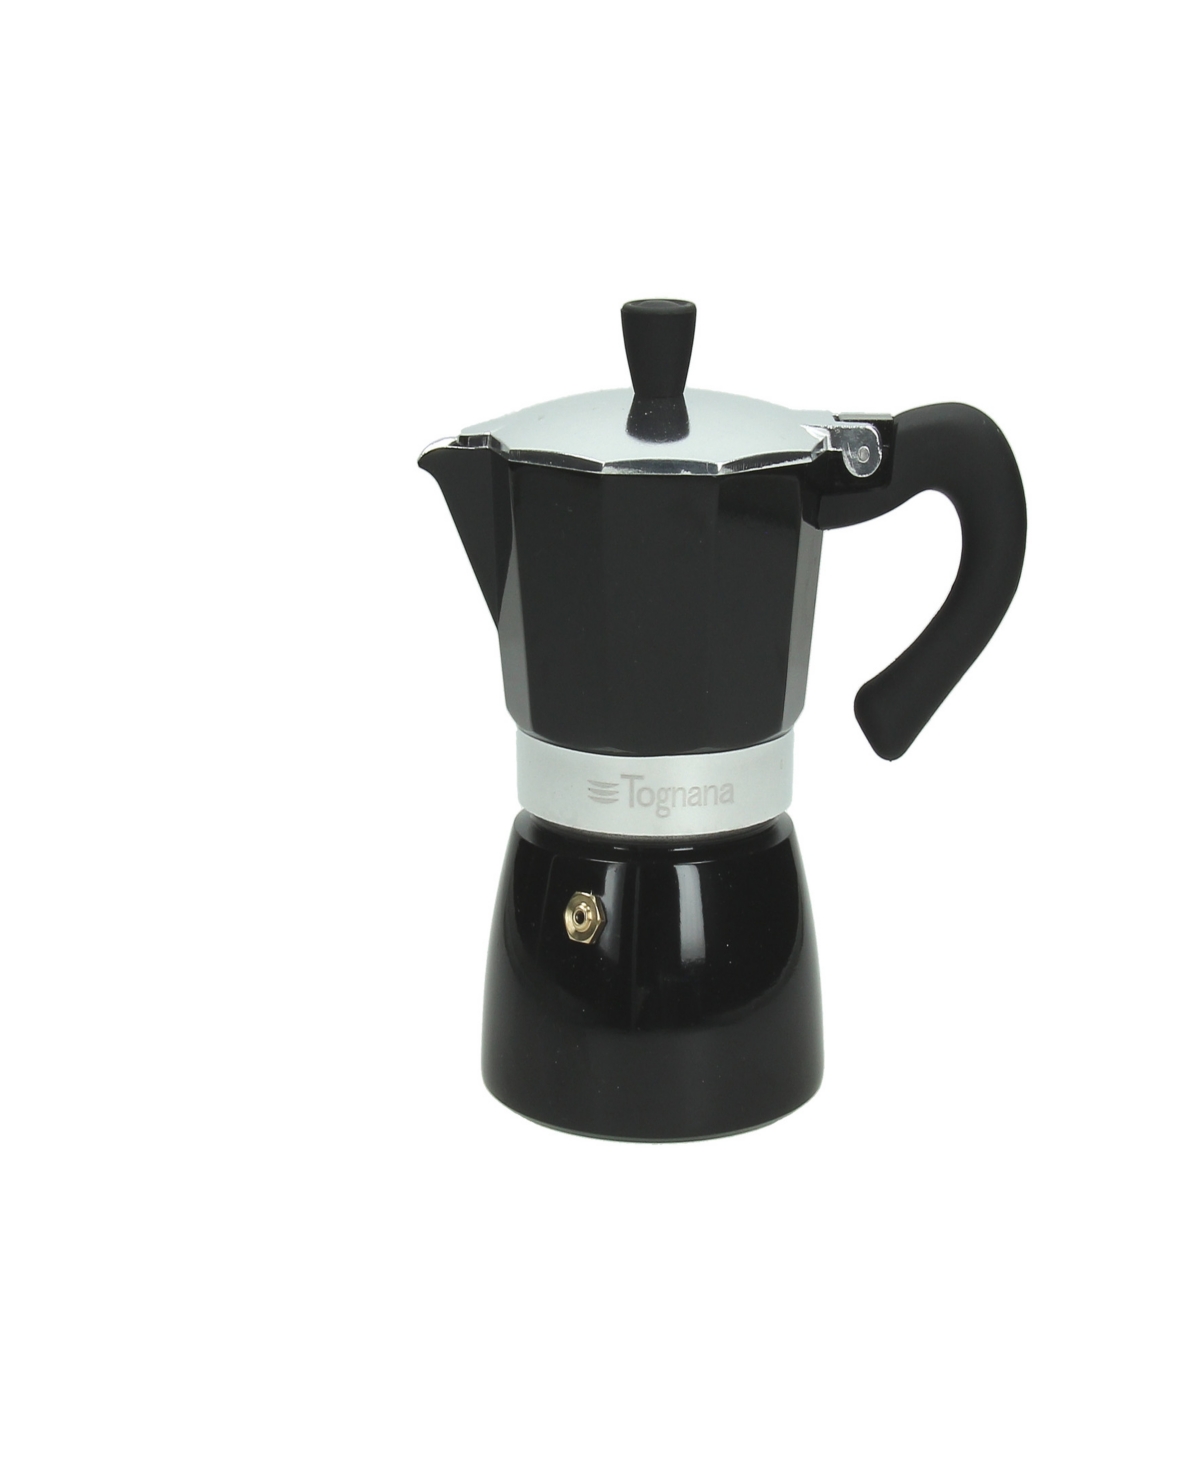 Tognana Extra Style 6 Cup Coffee Maker